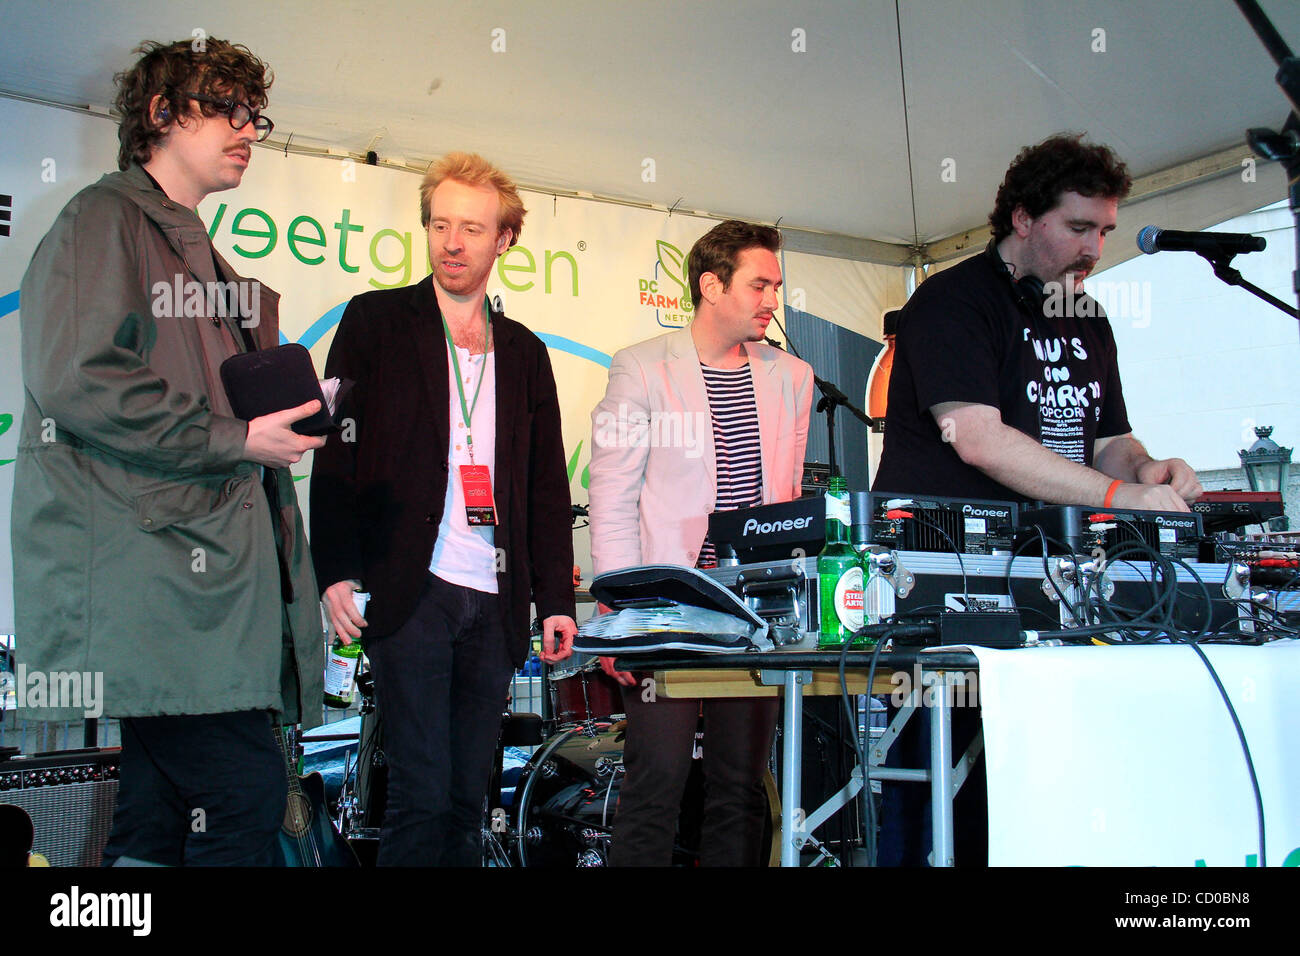 WASHINGTON, DC - April  24: Felix Martin, Al Doyle, Owen Clarke, and Joe Goddard of the band Hot Chip attend The First annual Sweetlife Festival, in partnership with Rock The Vote in celebration of Earth Day on April 24, 2010 in Washington, DC.   Felix Martin; Al Doyle; Owen Clarke; Joe Goddard Stock Photo